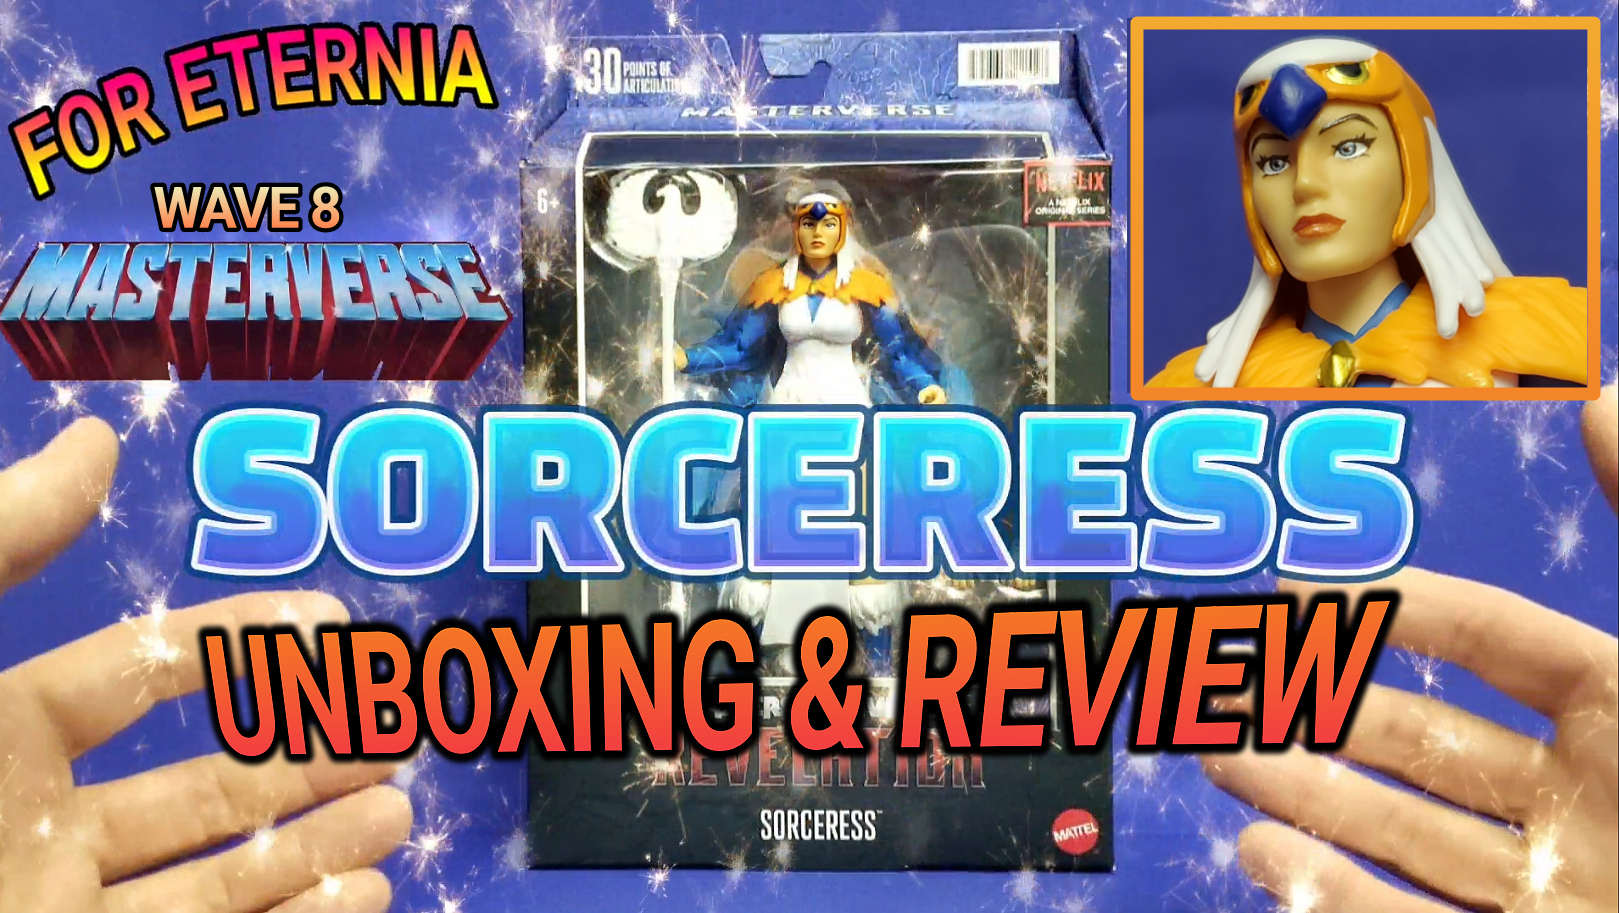 Watch our UNBOXING & REVIEW of the Sorceress, the Wave 8 Revelation Masterverse figure